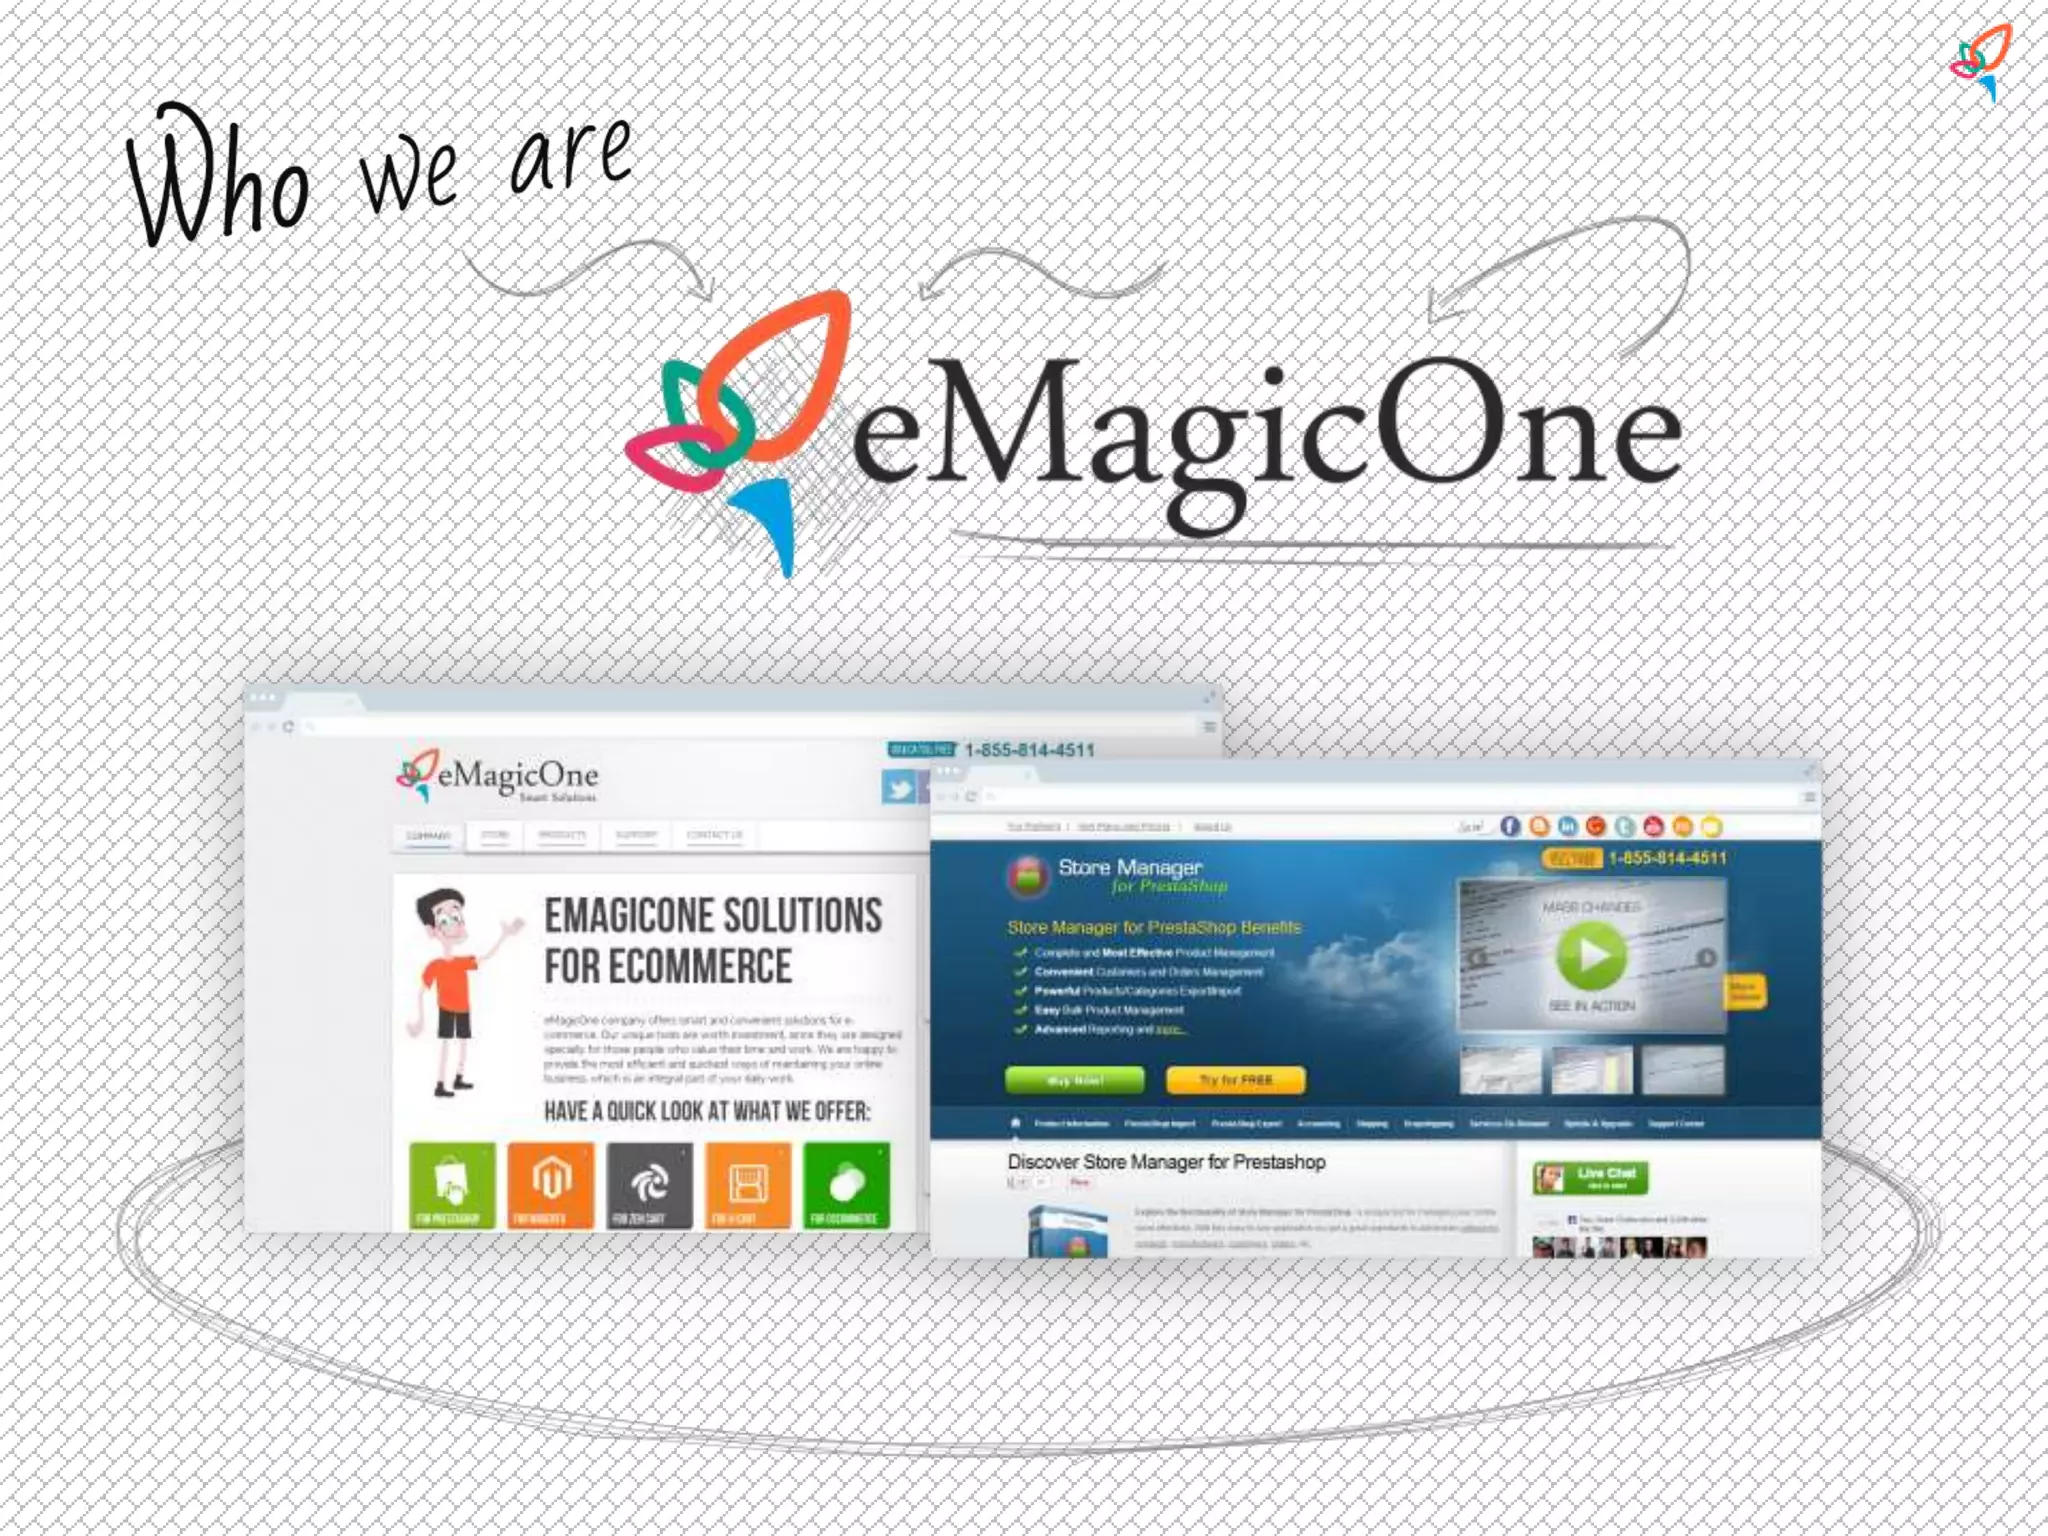 Emagicone - Using Store Manager for PrestaShop